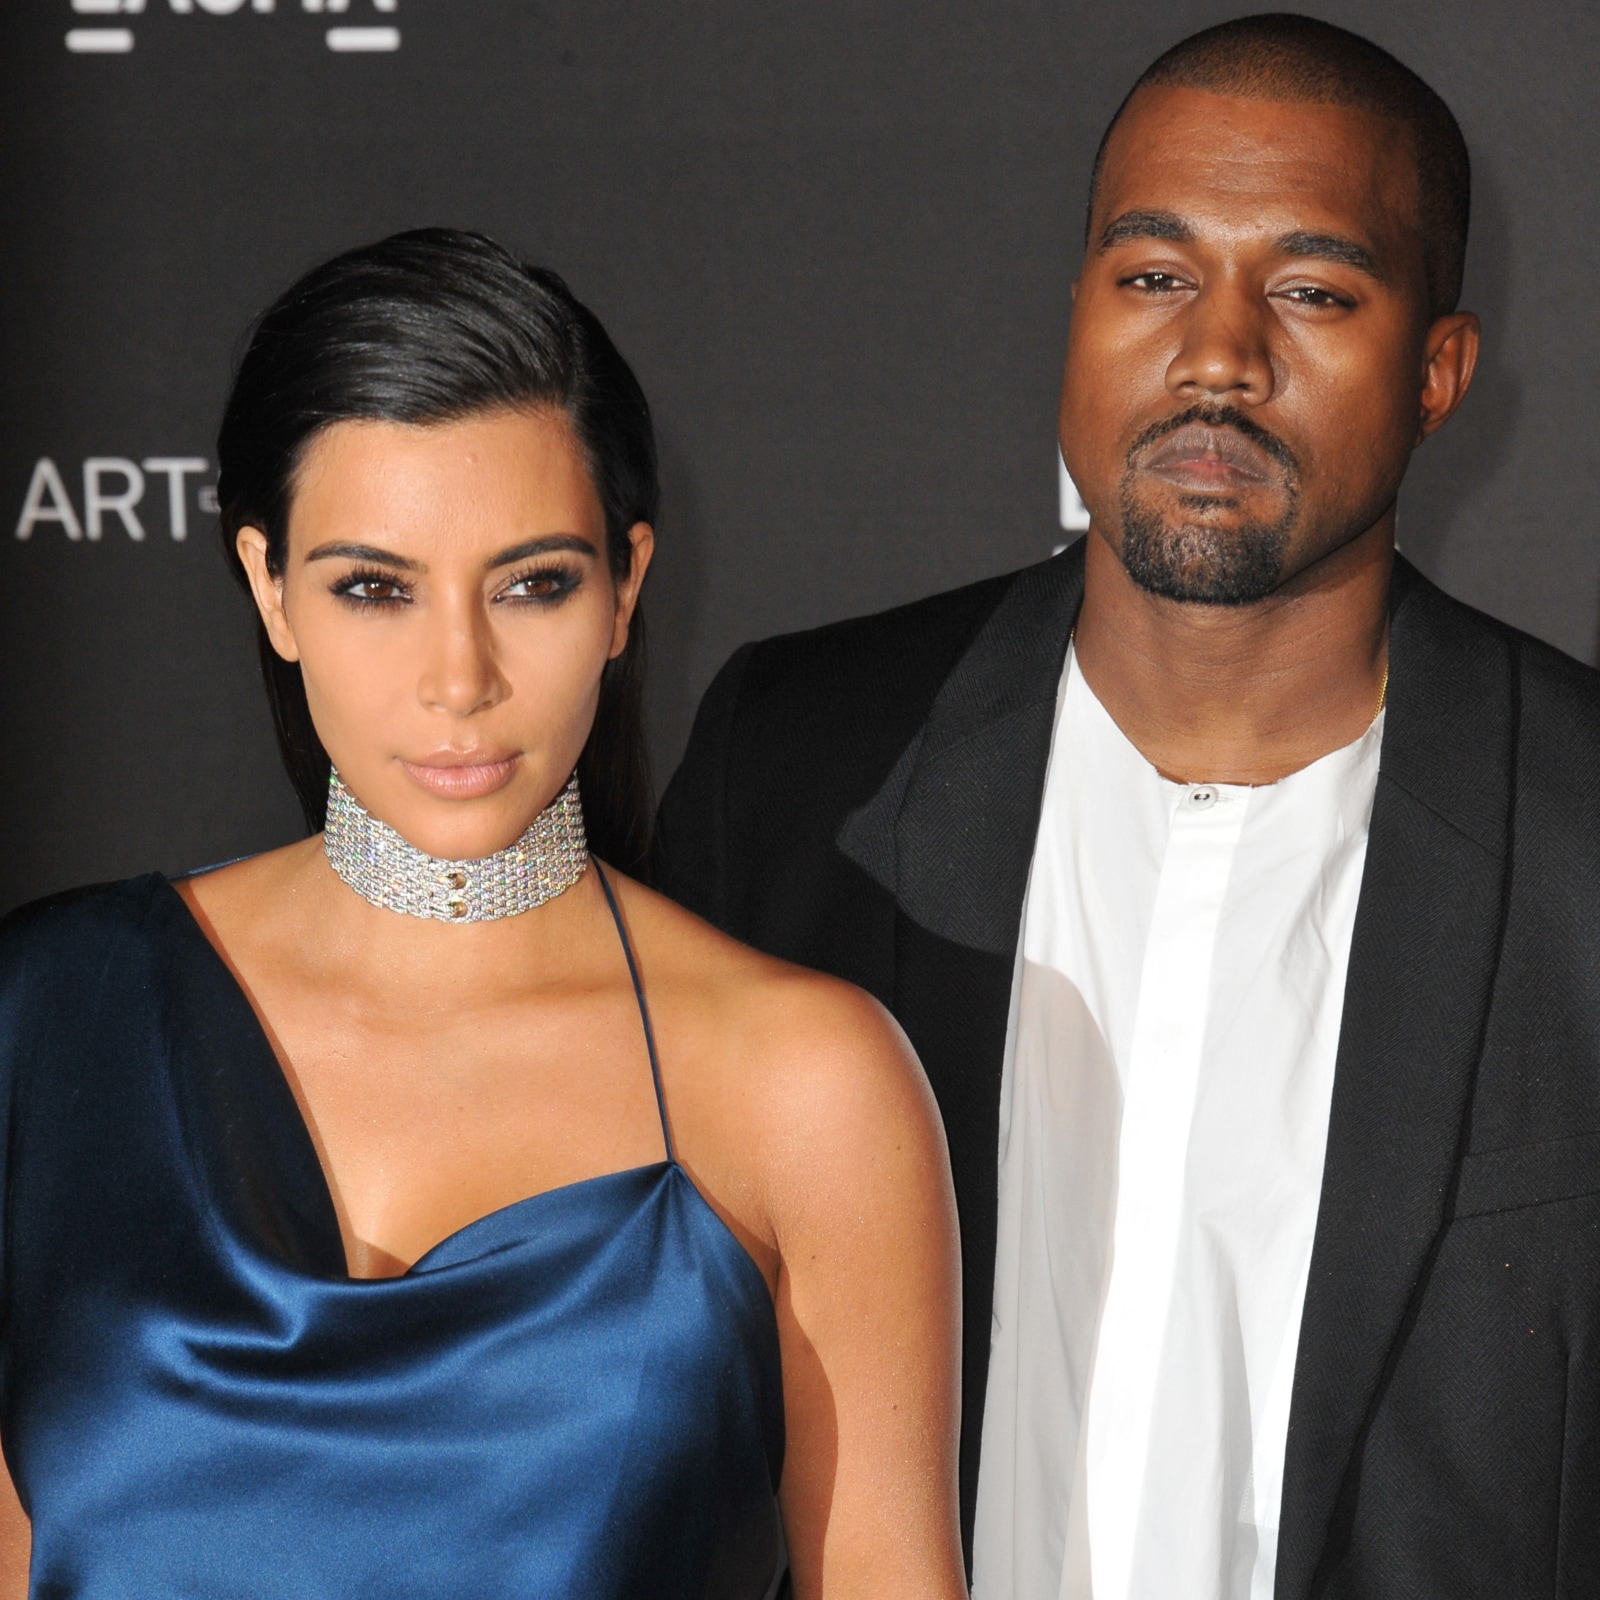 Kim Kardashian reunites with ex Kanye West as they join other